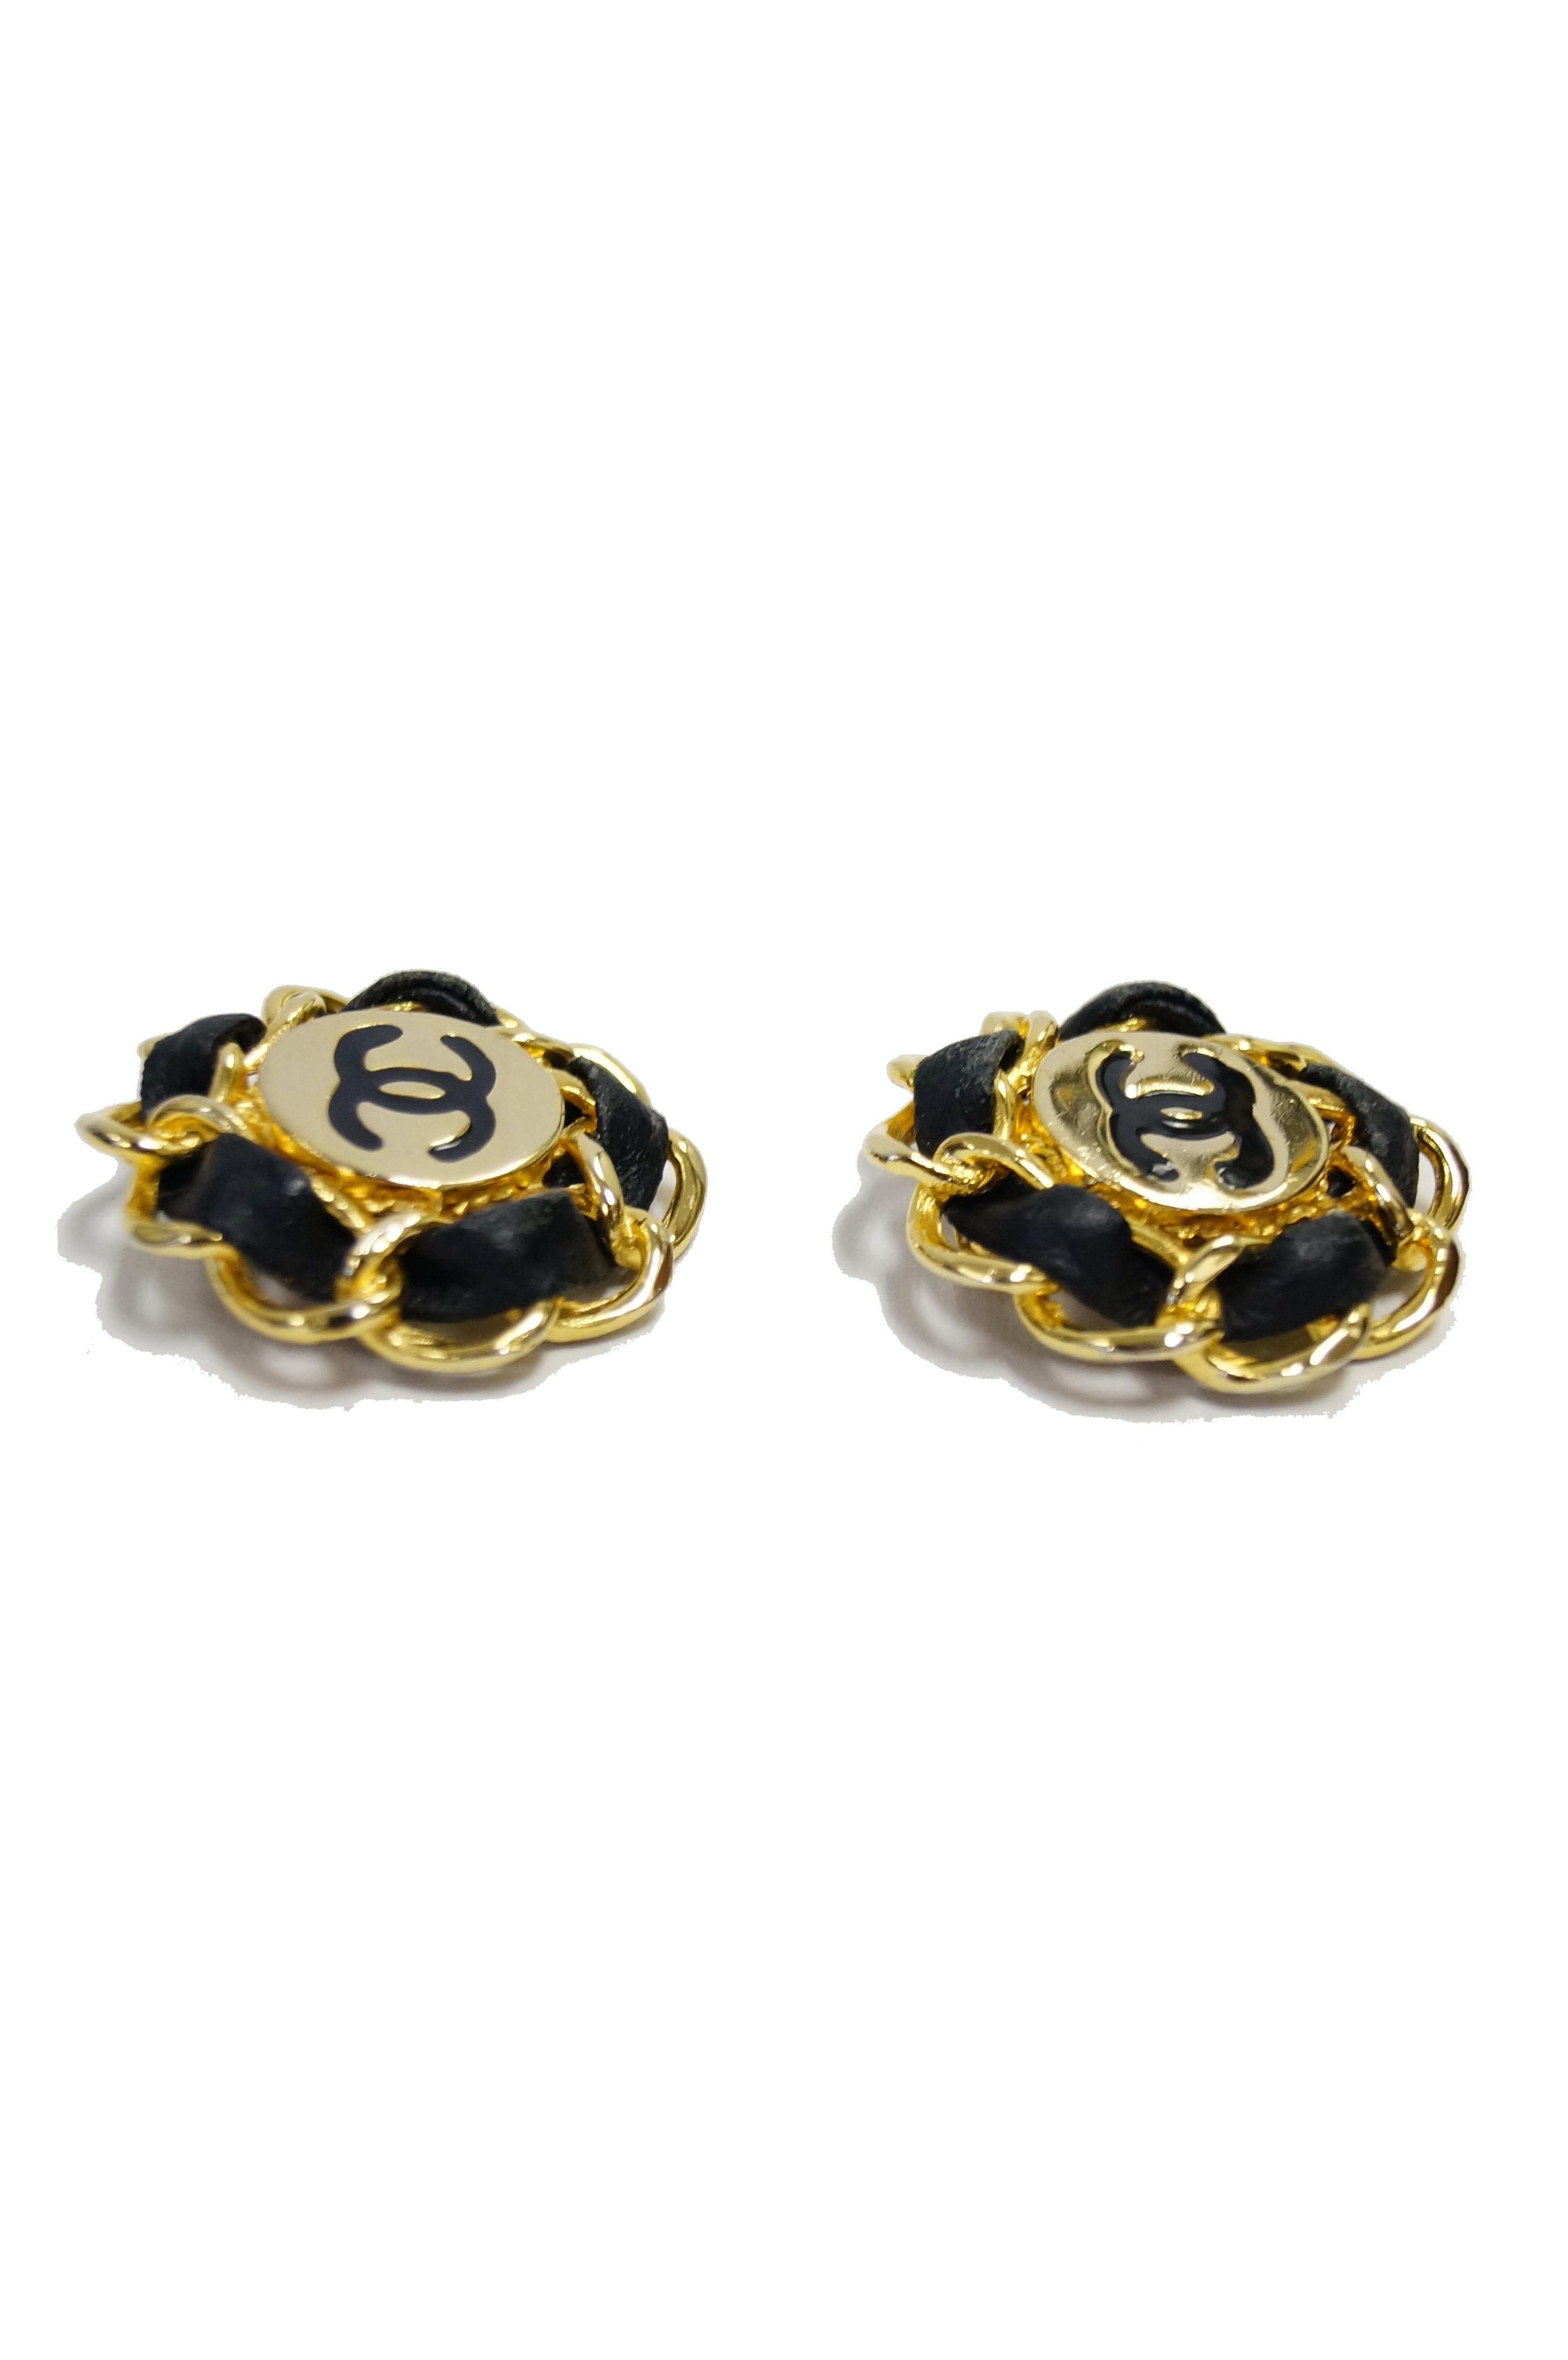 Amazing gold tone Chanel clip earrings! The earrings are circular and feature a chunky gold chain border, with leather woven through the links. At the center us a circular disc engraved and enameled with the famous Chanel linked Cs'. Unmistakably